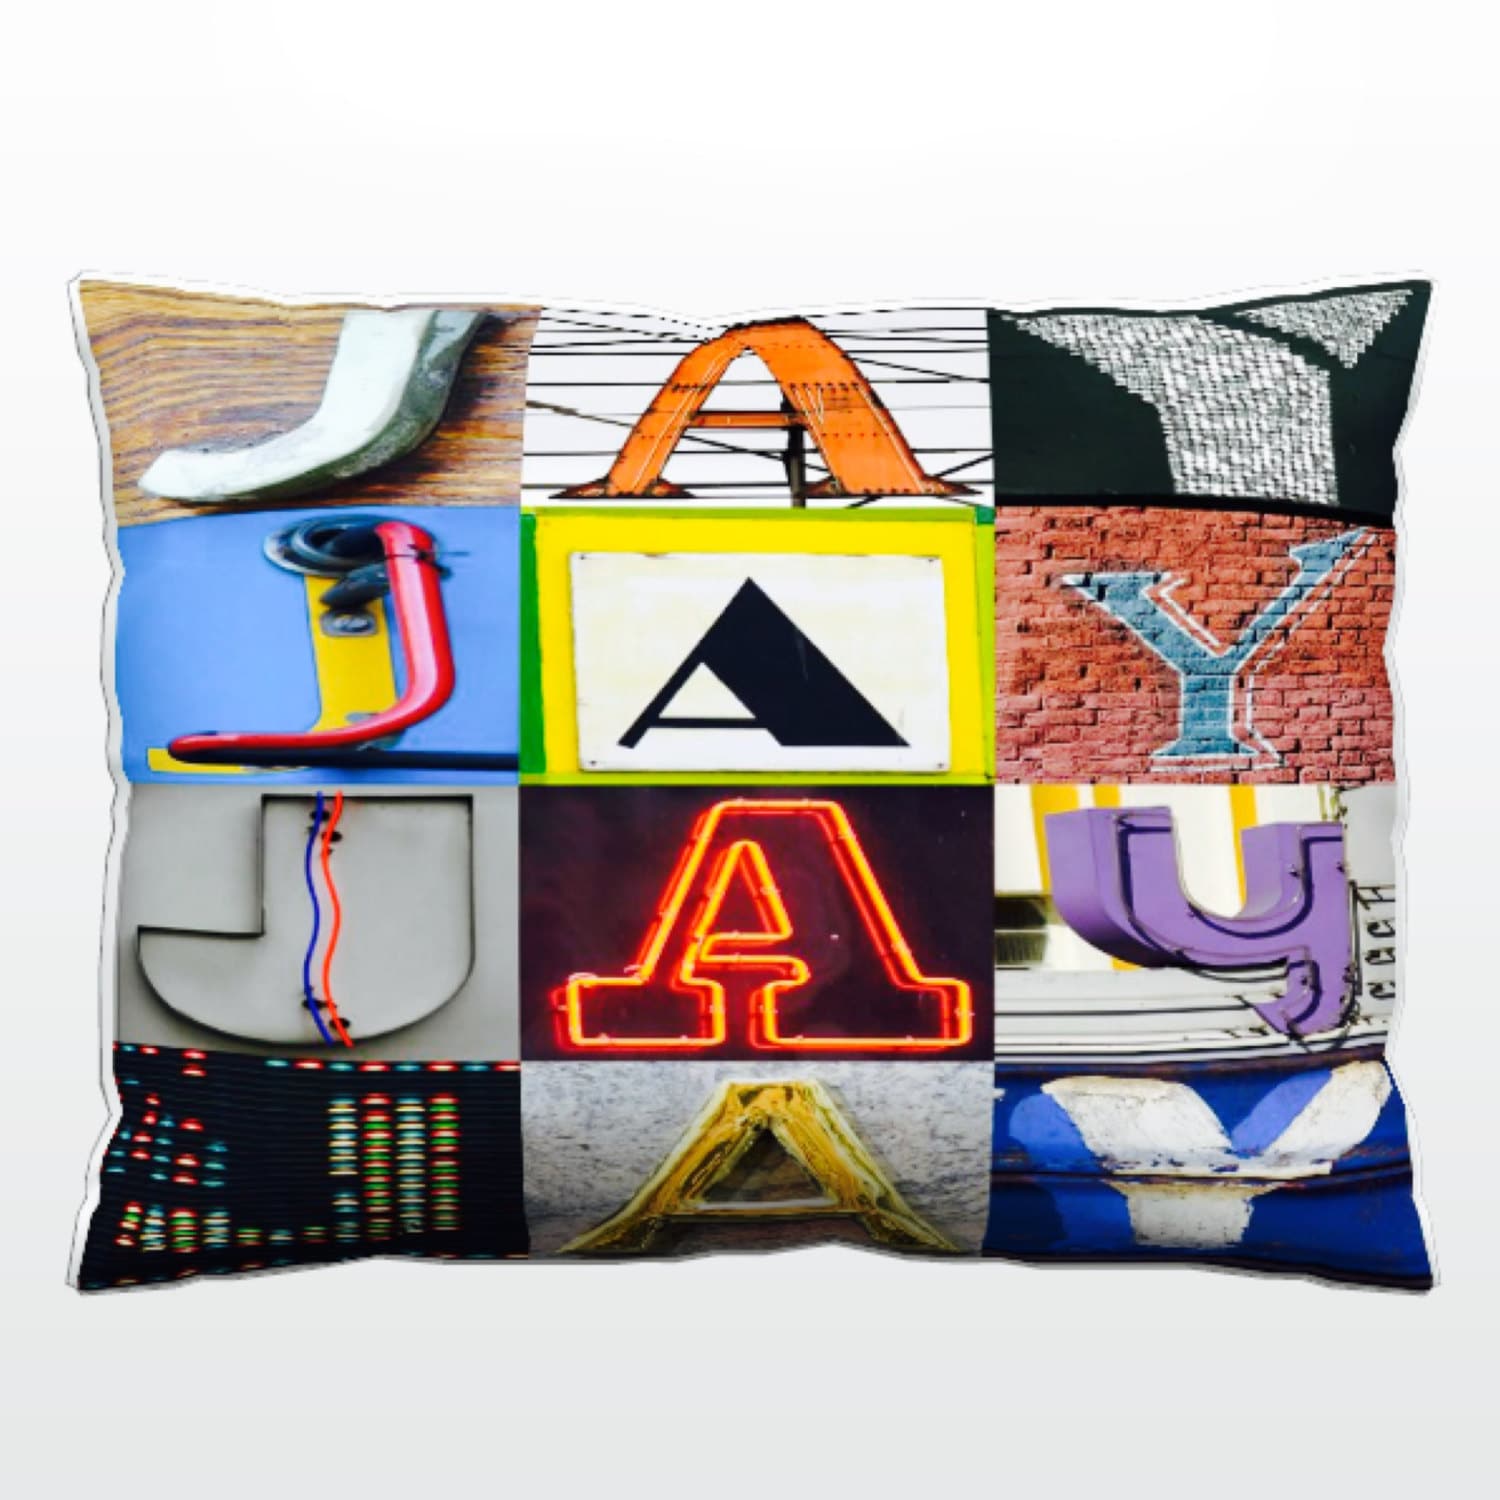 Personalized Pillow featuring IVY in photos of sign letters; Custom couch cushions; Colorful pillows; Photo pillow; Sofa pillows